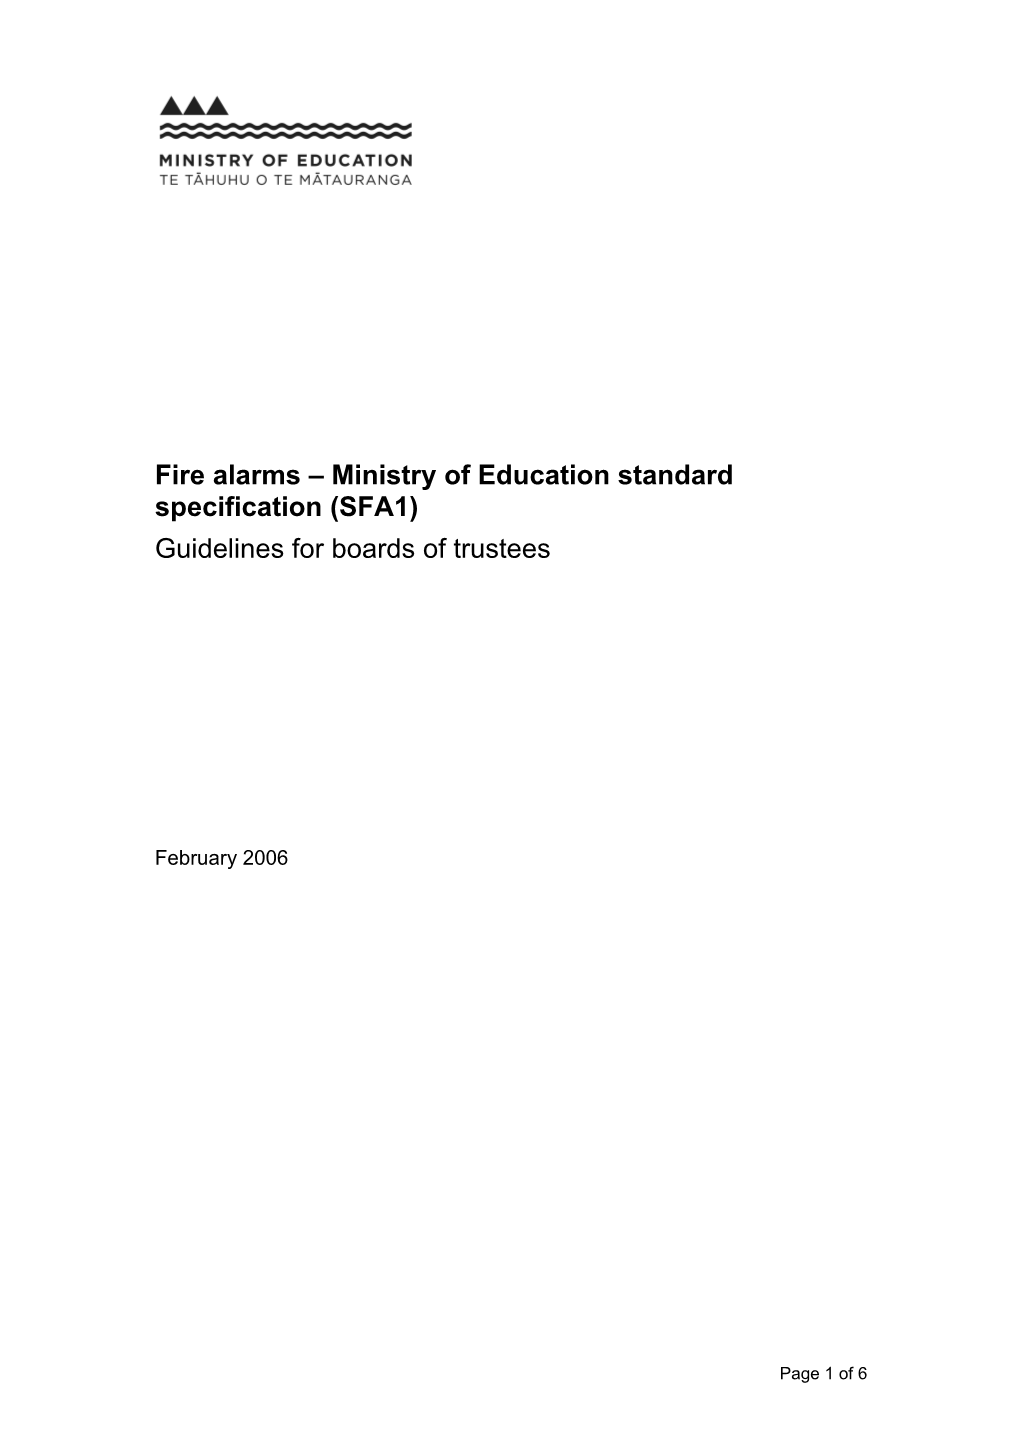 Fire Alarms - Ministry of Education Standard Specification (SFA1)